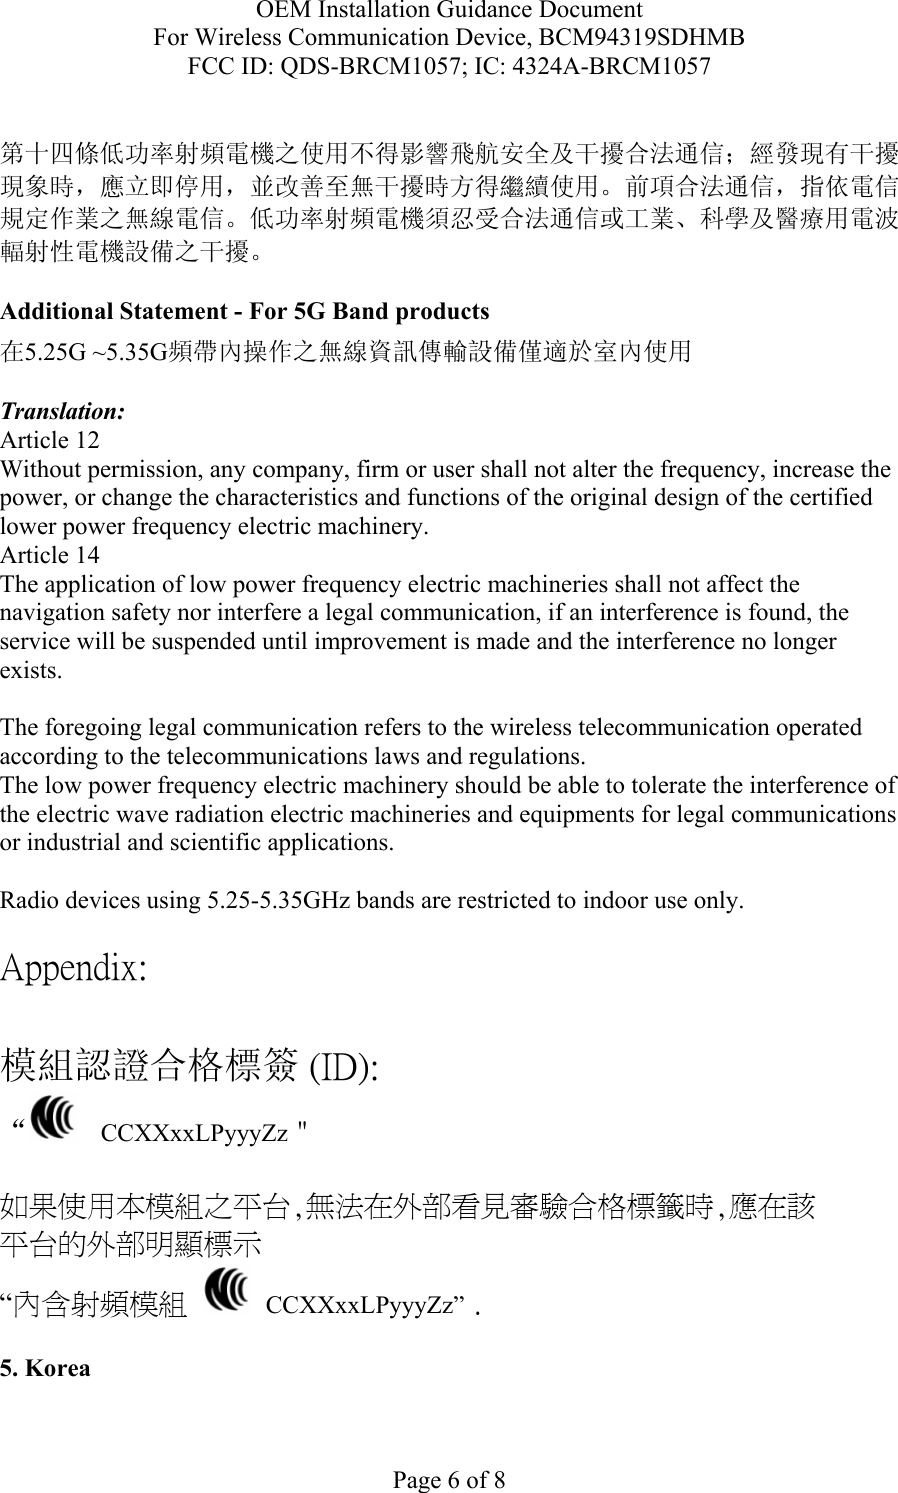 OEM Installation Guidance Document For Wireless Communication Device, BCM94319SDHMB FCC ID: QDS-BRCM1057; IC: 4324A-BRCM1057  Page 6 of 8  第十四條低功率射頻電機之使用不得影響飛航安全及干擾合法通信；經發現有干擾現象時，應立即停用，並改善至無干擾時方得繼續使用。前項合法通信，指依電信規定作業之無線電信。低功率射頻電機須忍受合法通信或工業、科學及醫療用電波輻射性電機設備之干擾。  Additional Statement - For 5G Band products 在5.25G ~5.35G頻帶內操作之無線資訊傳輸設備僅適於室內使用  Translation: Article 12 Without permission, any company, firm or user shall not alter the frequency, increase the power, or change the characteristics and functions of the original design of the certified lower power frequency electric machinery. Article 14 The application of low power frequency electric machineries shall not affect the navigation safety nor interfere a legal communication, if an interference is found, the service will be suspended until improvement is made and the interference no longer exists.  The foregoing legal communication refers to the wireless telecommunication operated according to the telecommunications laws and regulations. The low power frequency electric machinery should be able to tolerate the interference of the electric wave radiation electric machineries and equipments for legal communications or industrial and scientific applications.  Radio devices using 5.25-5.35GHz bands are restricted to indoor use only.  Appendix:  模組認證合格標簽 (ID): “   CCXXxxLPyyyZz＂  如果使用本模組之平台,無法在外部看見審驗合格標籤時,應在該 平台的外部明顯標示 “內含射頻模組   CCXXxxLPyyyZz” .  5. Korea  